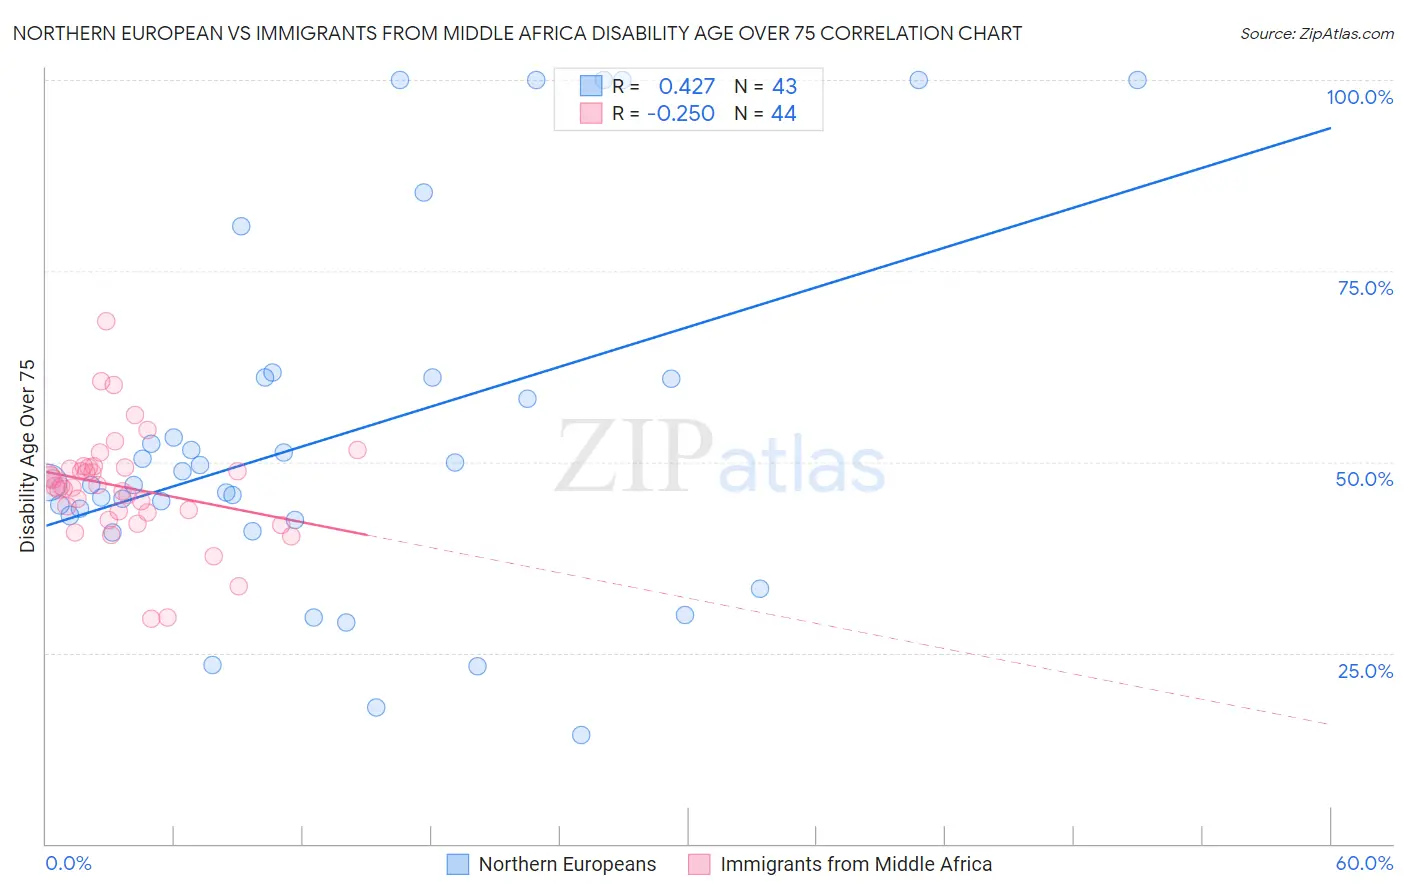 Northern European vs Immigrants from Middle Africa Disability Age Over 75